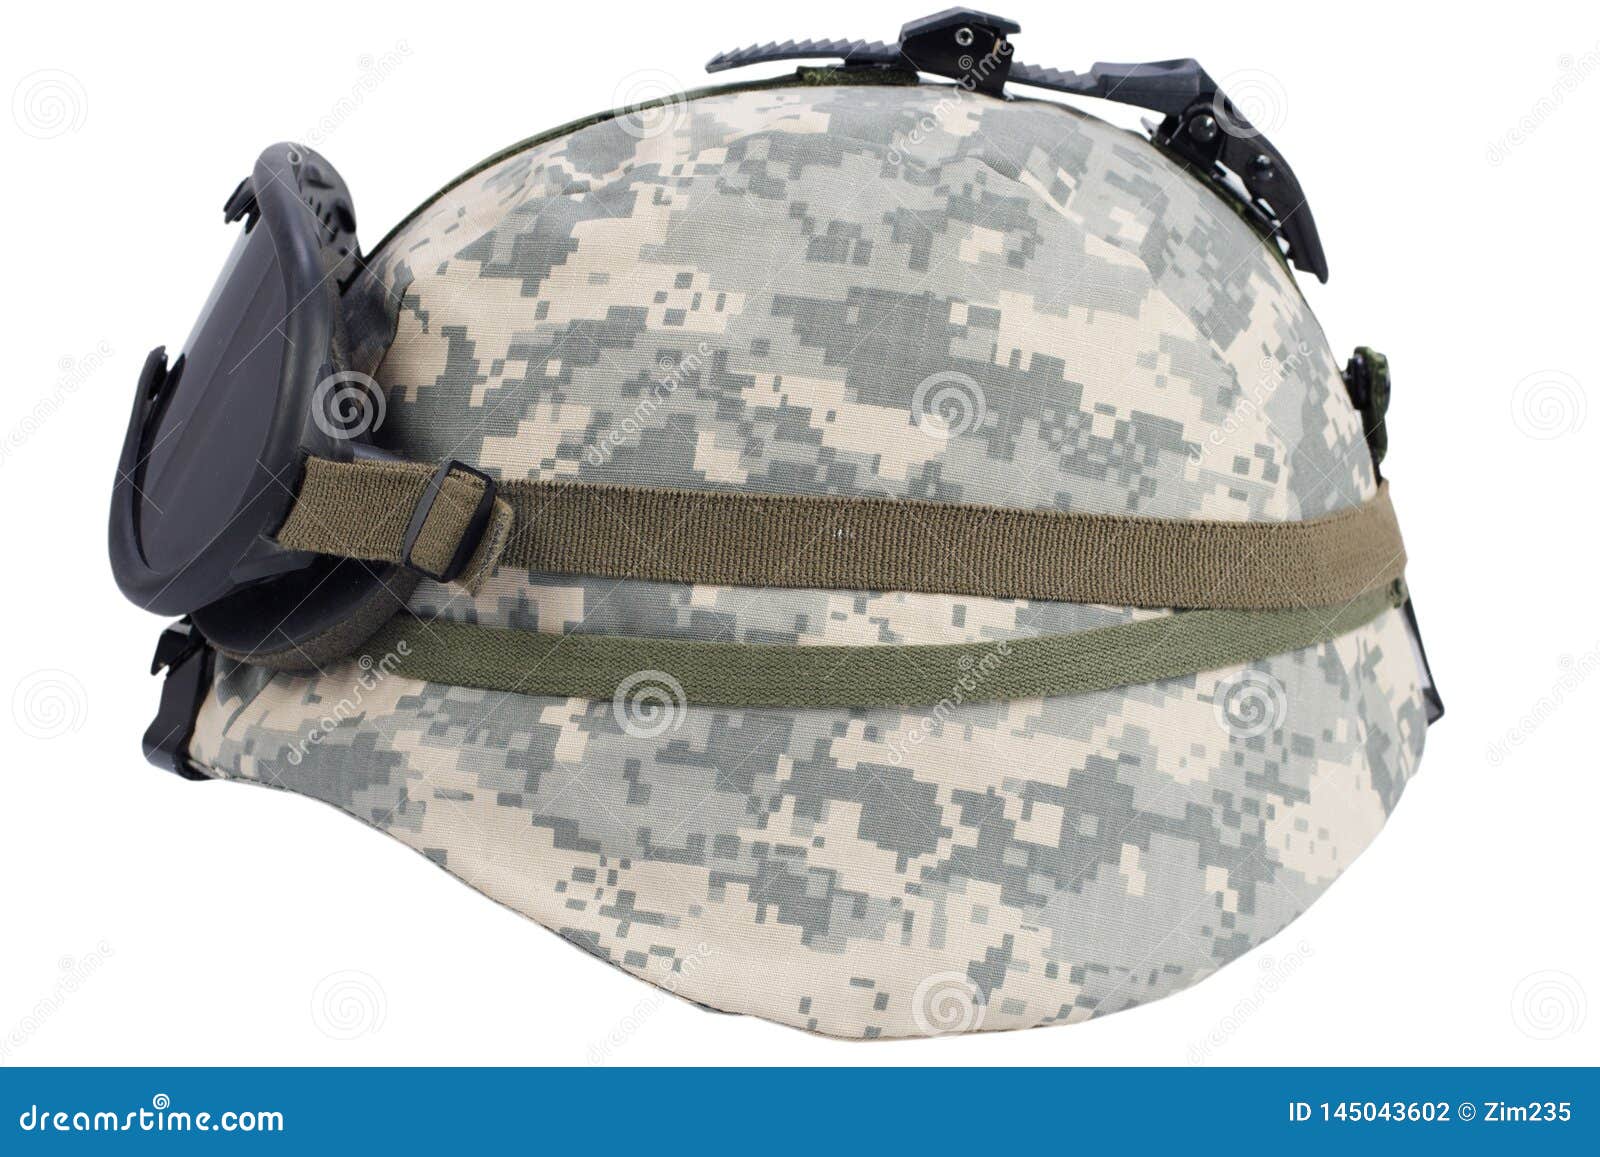 Us Army Kevlar Helmet with Goggles Stock Photo - Image of storm, rough:  145043602